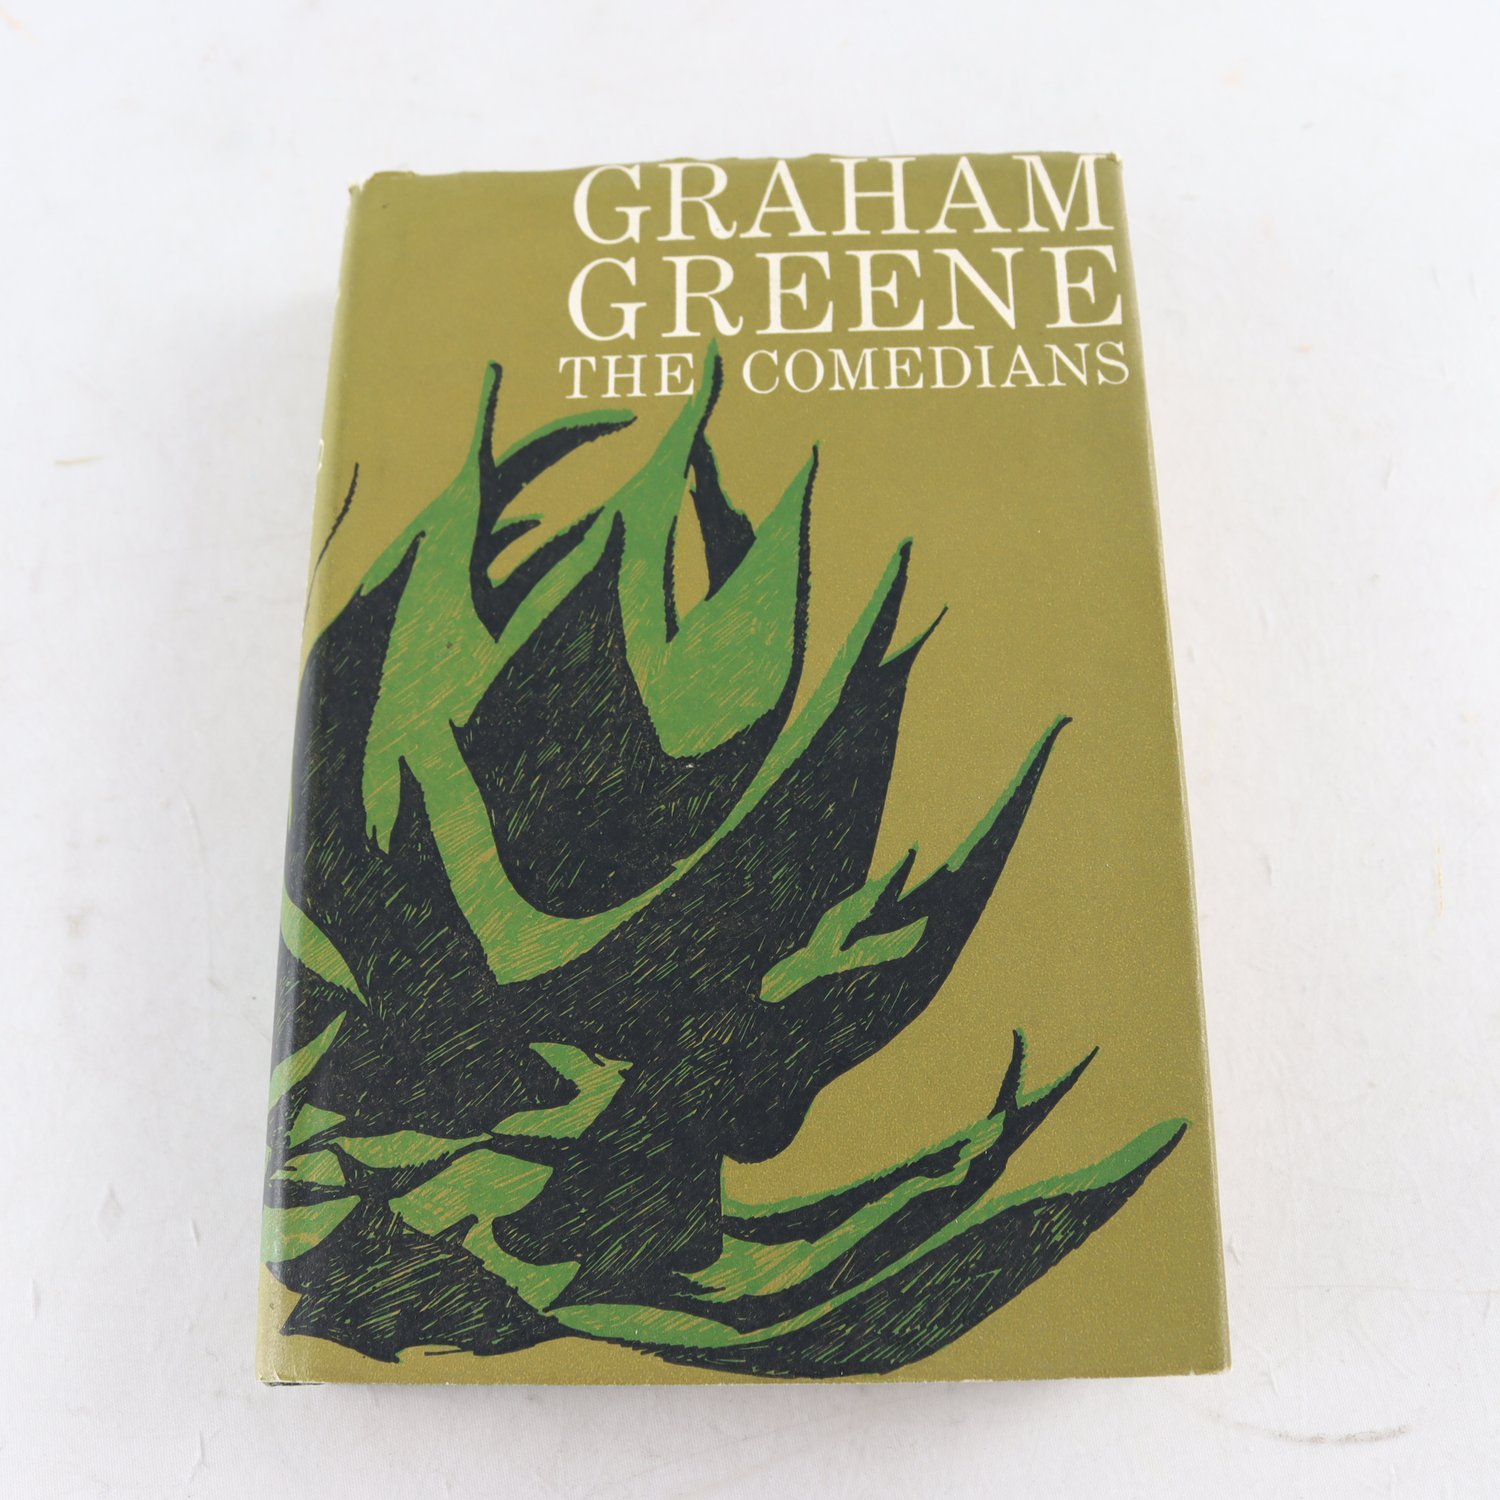 Graham Greene, The Comedians (First edition, 1966)